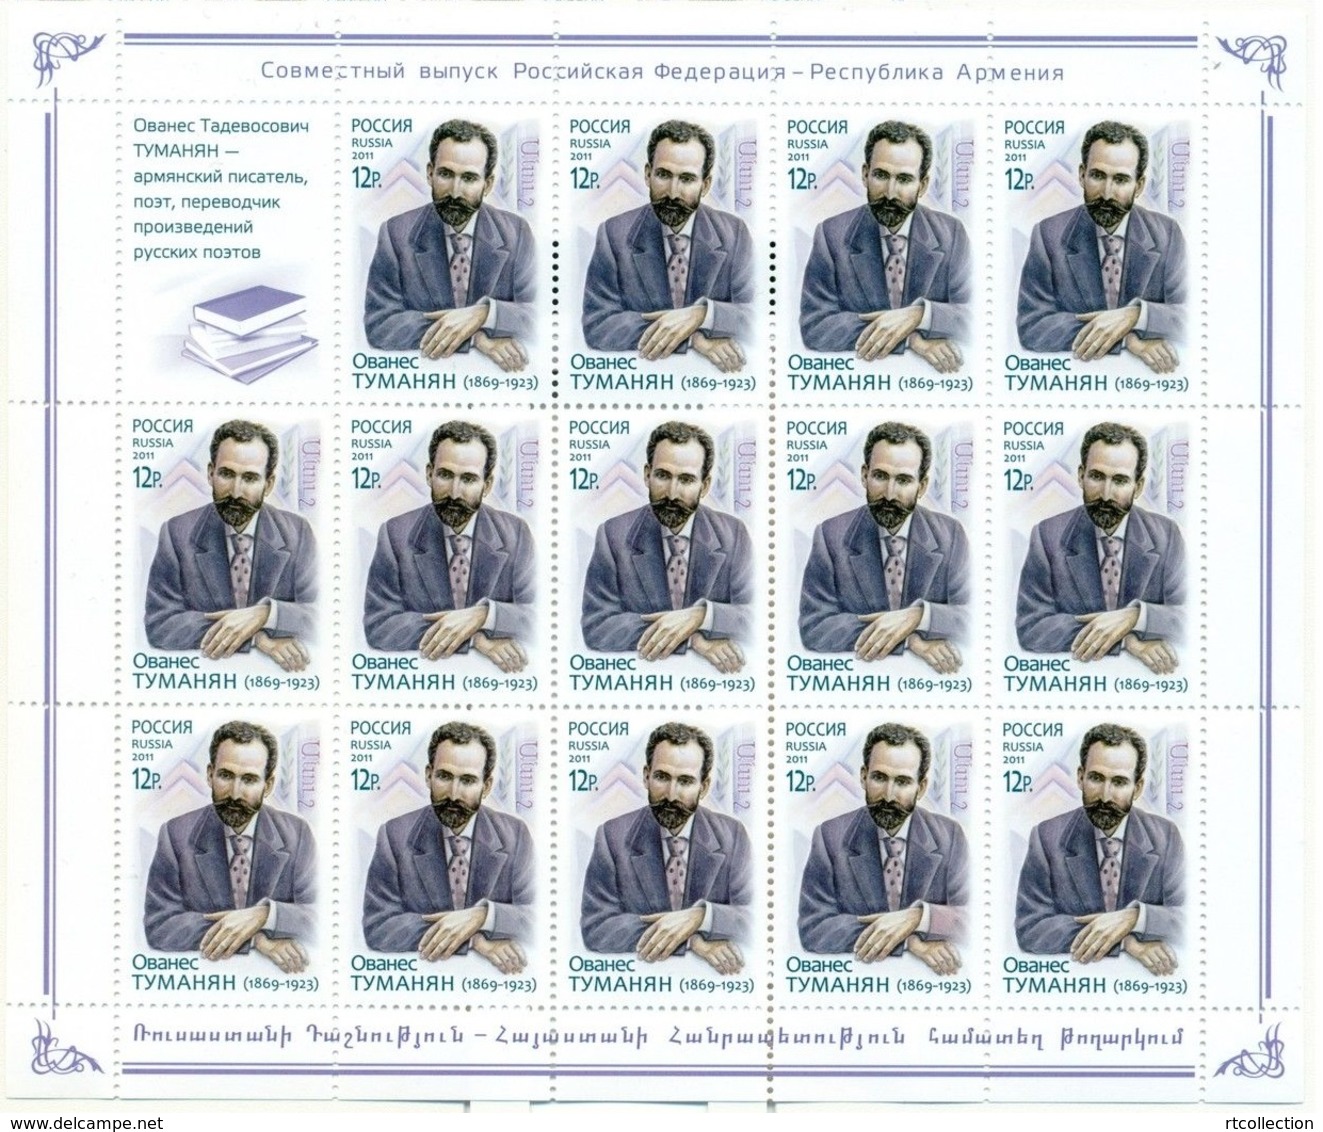 Russia 2011 Sheet Personalities Joint Issue With Armenia Famous People Ovanes Tumanian Writer 1869-1935 Stamps MNH - Ganze Bögen